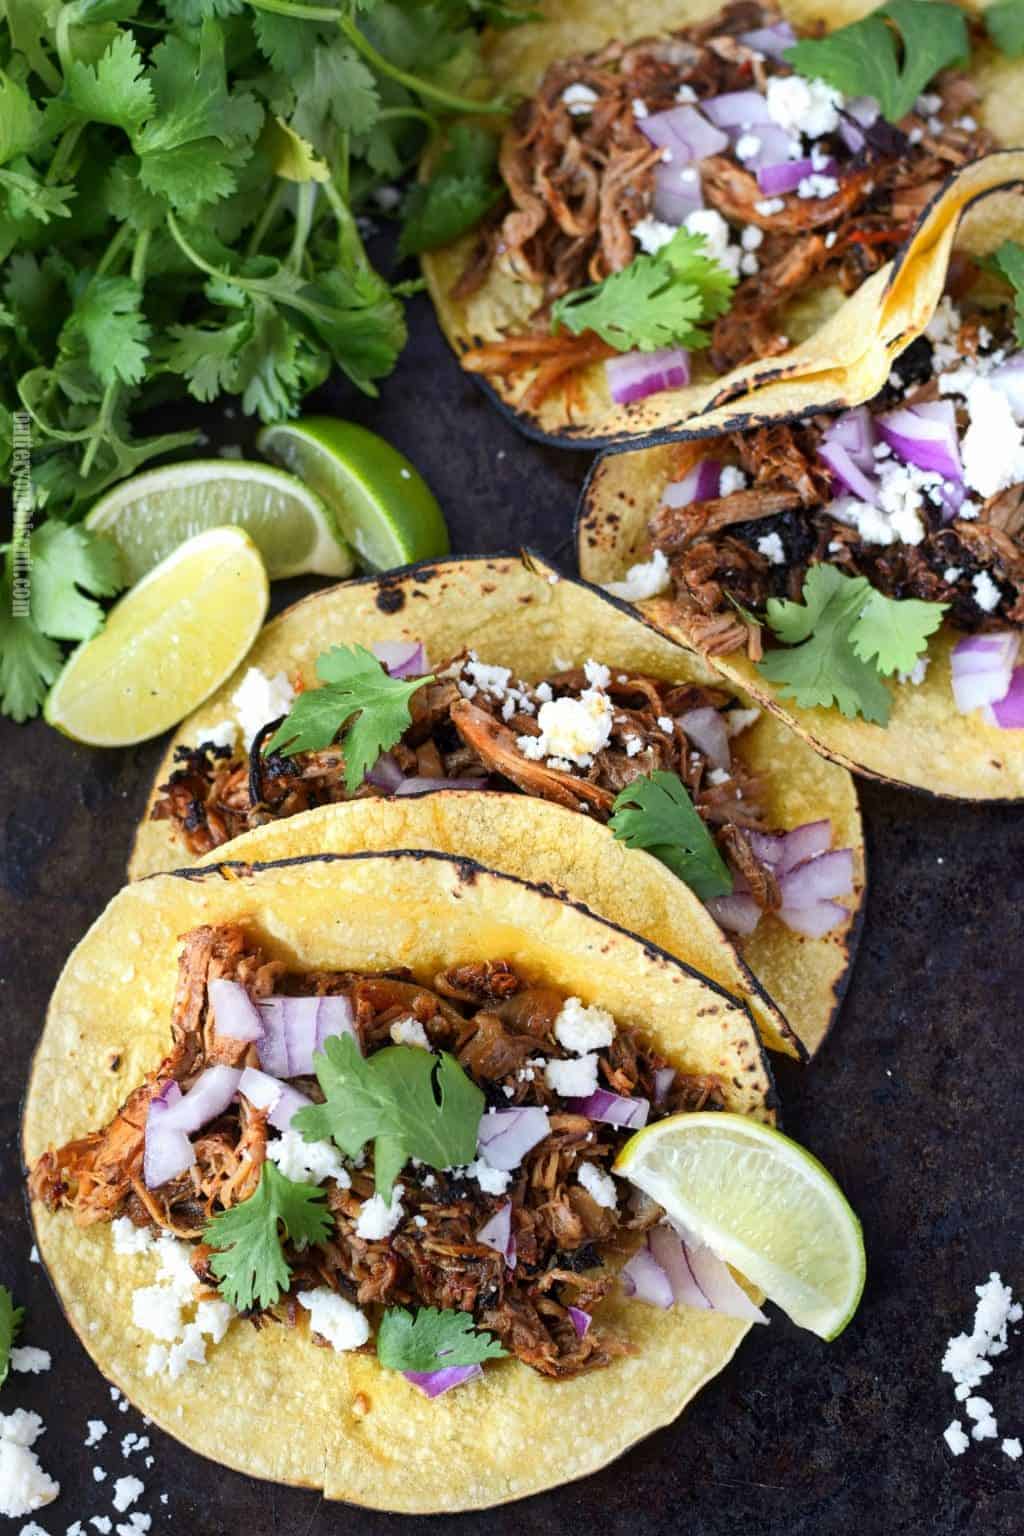 A plate of food, with Taco and Carnitas